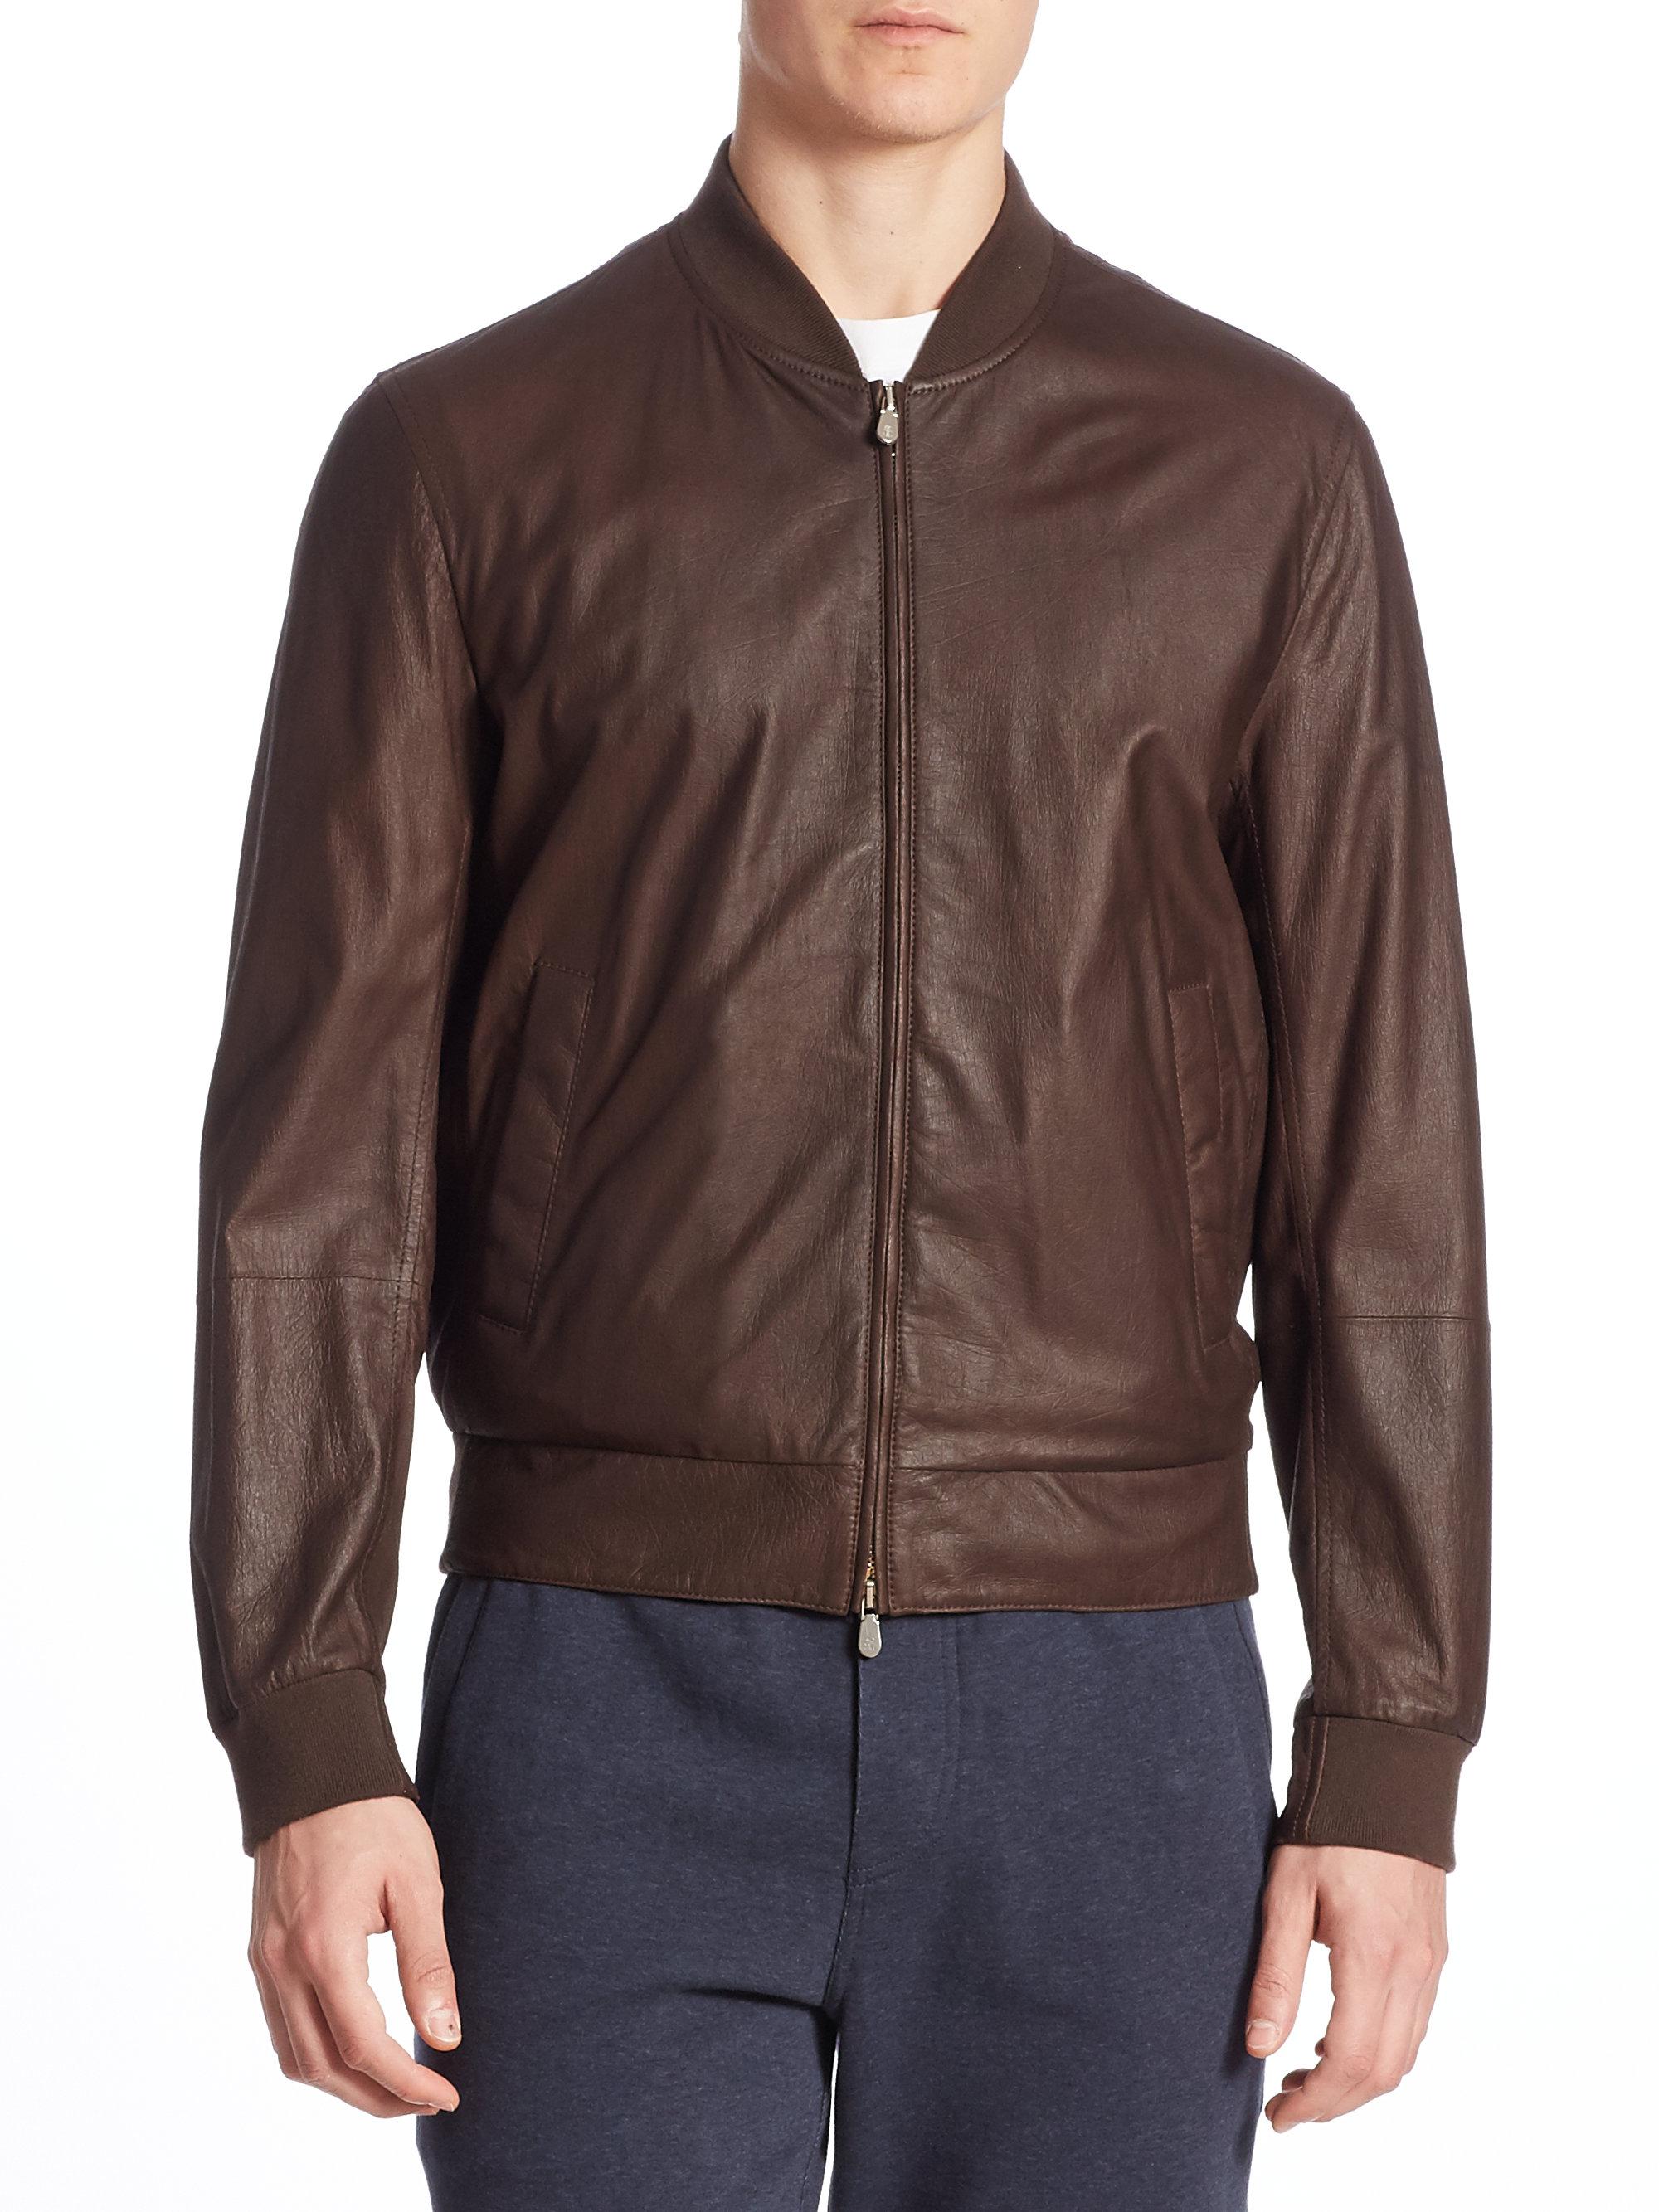 Lyst - Brunello Cucinelli Leather Bomber Jacket in Brown for Men